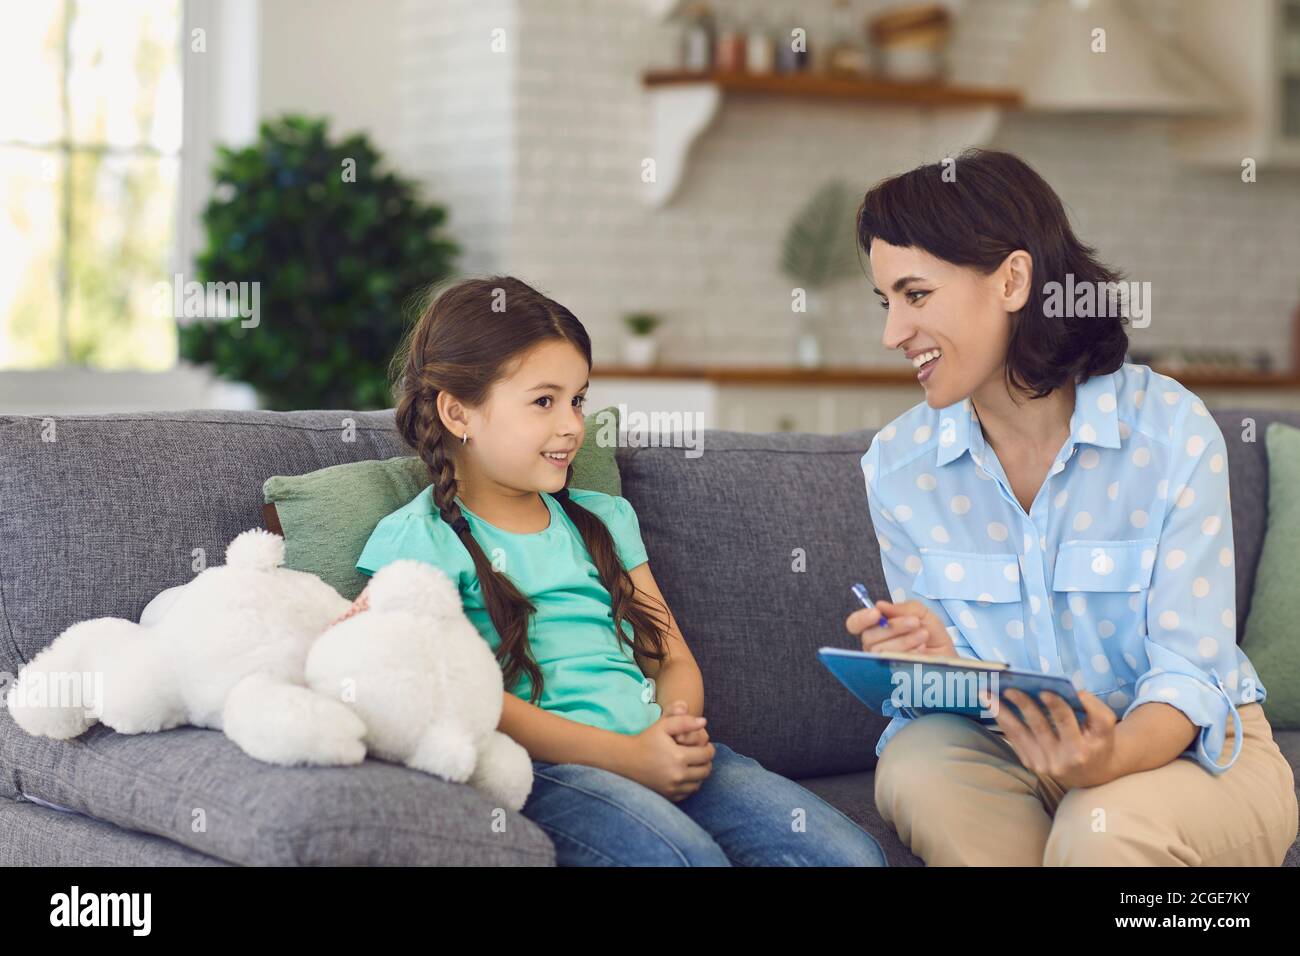 Smiling little girl talks to a cheerful child psychotherapist during a therapy session in the office. Stock Photo